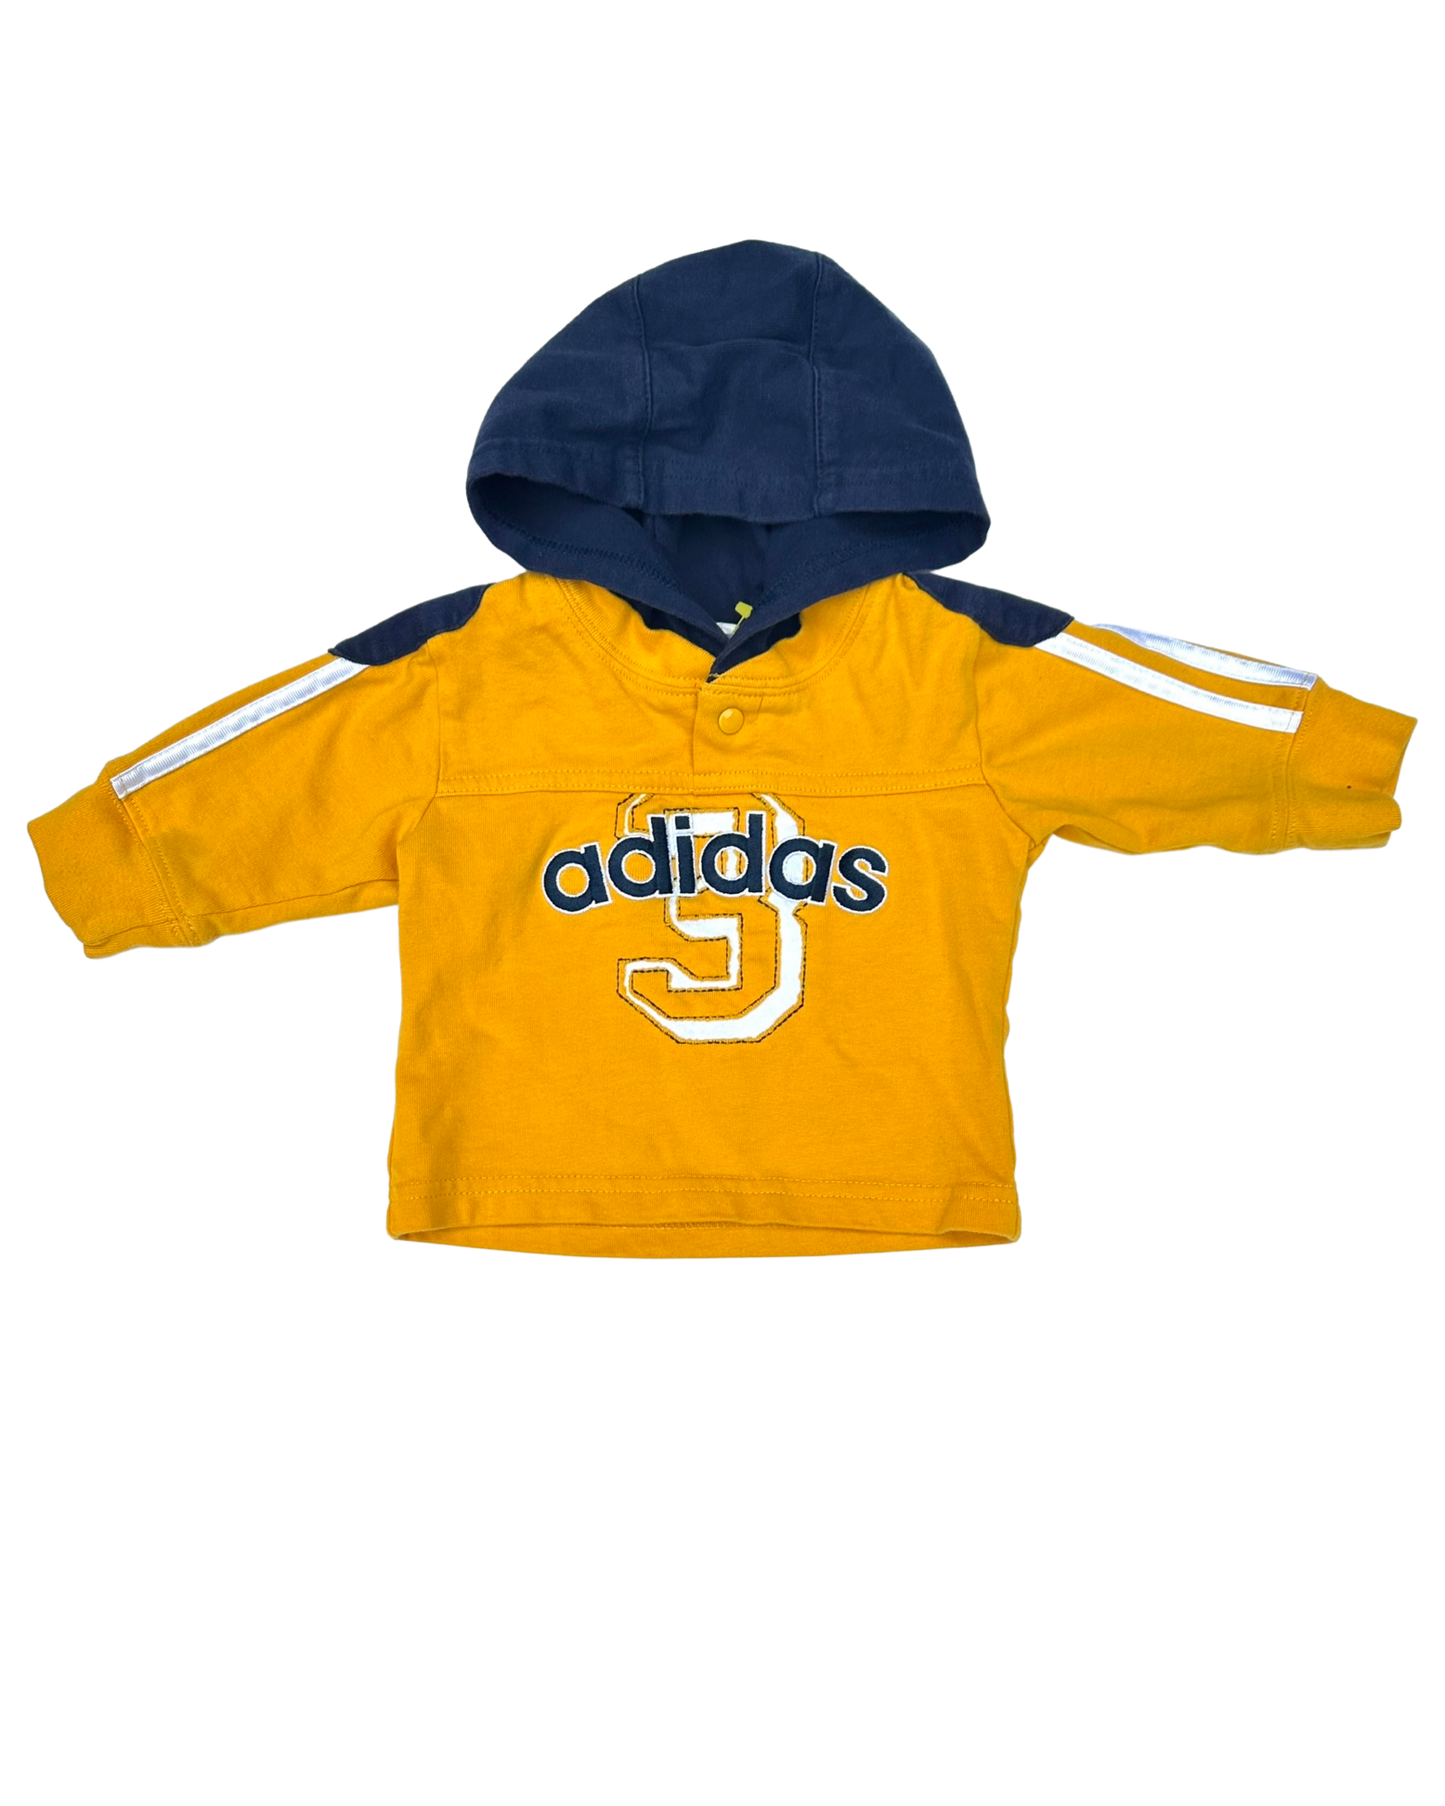 Adidas 3 stripe yellow hooded top (0-3mths)